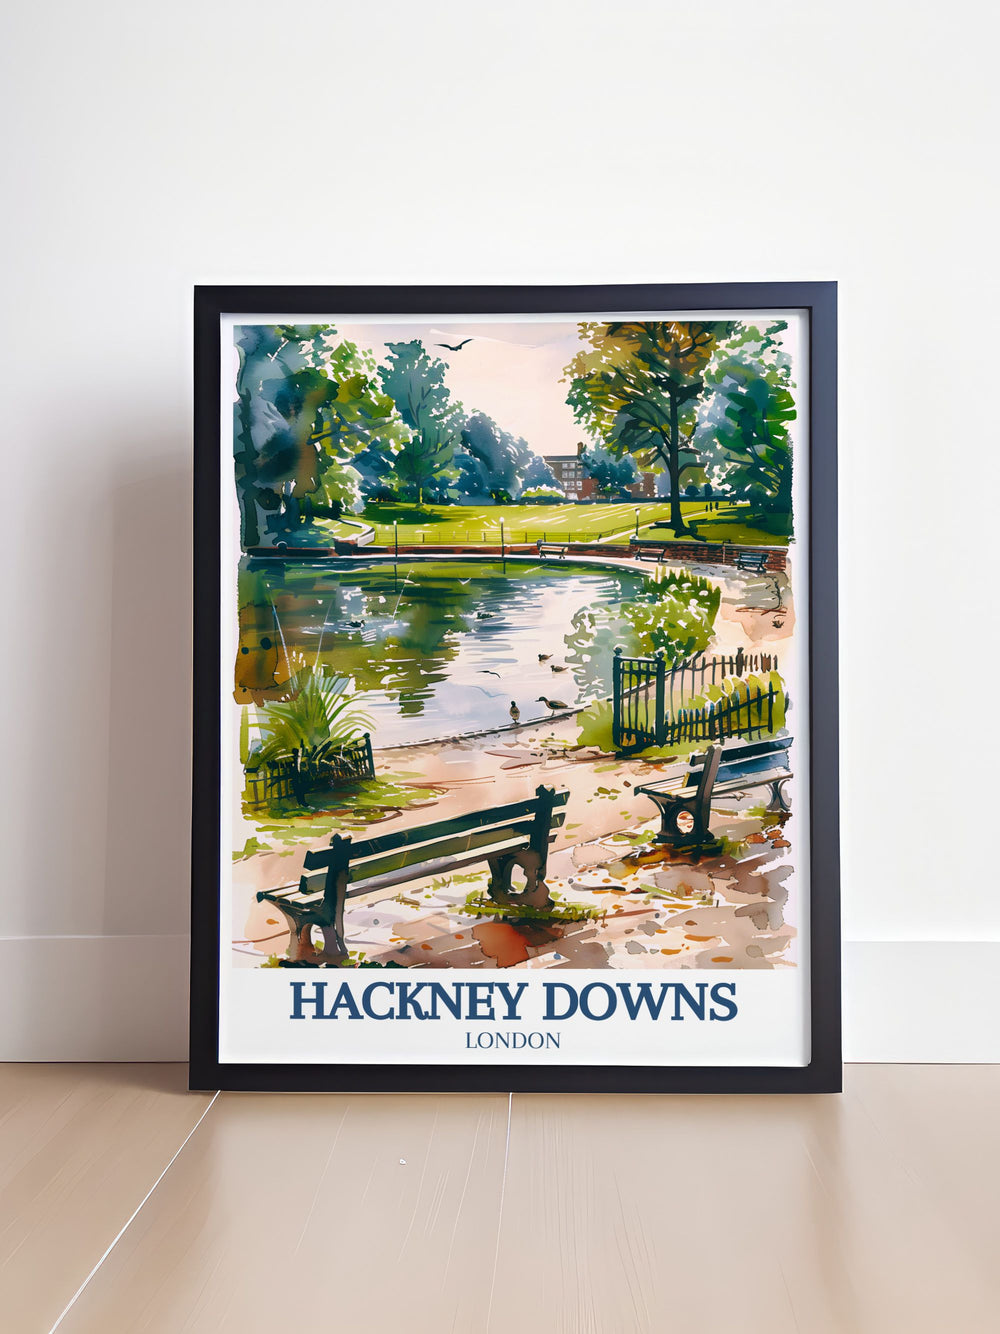 Highlighting the historic and natural beauty of Clapton Pond, this travel poster captures the peaceful landscapes and community spirit of Hackney, ideal for your home decor.